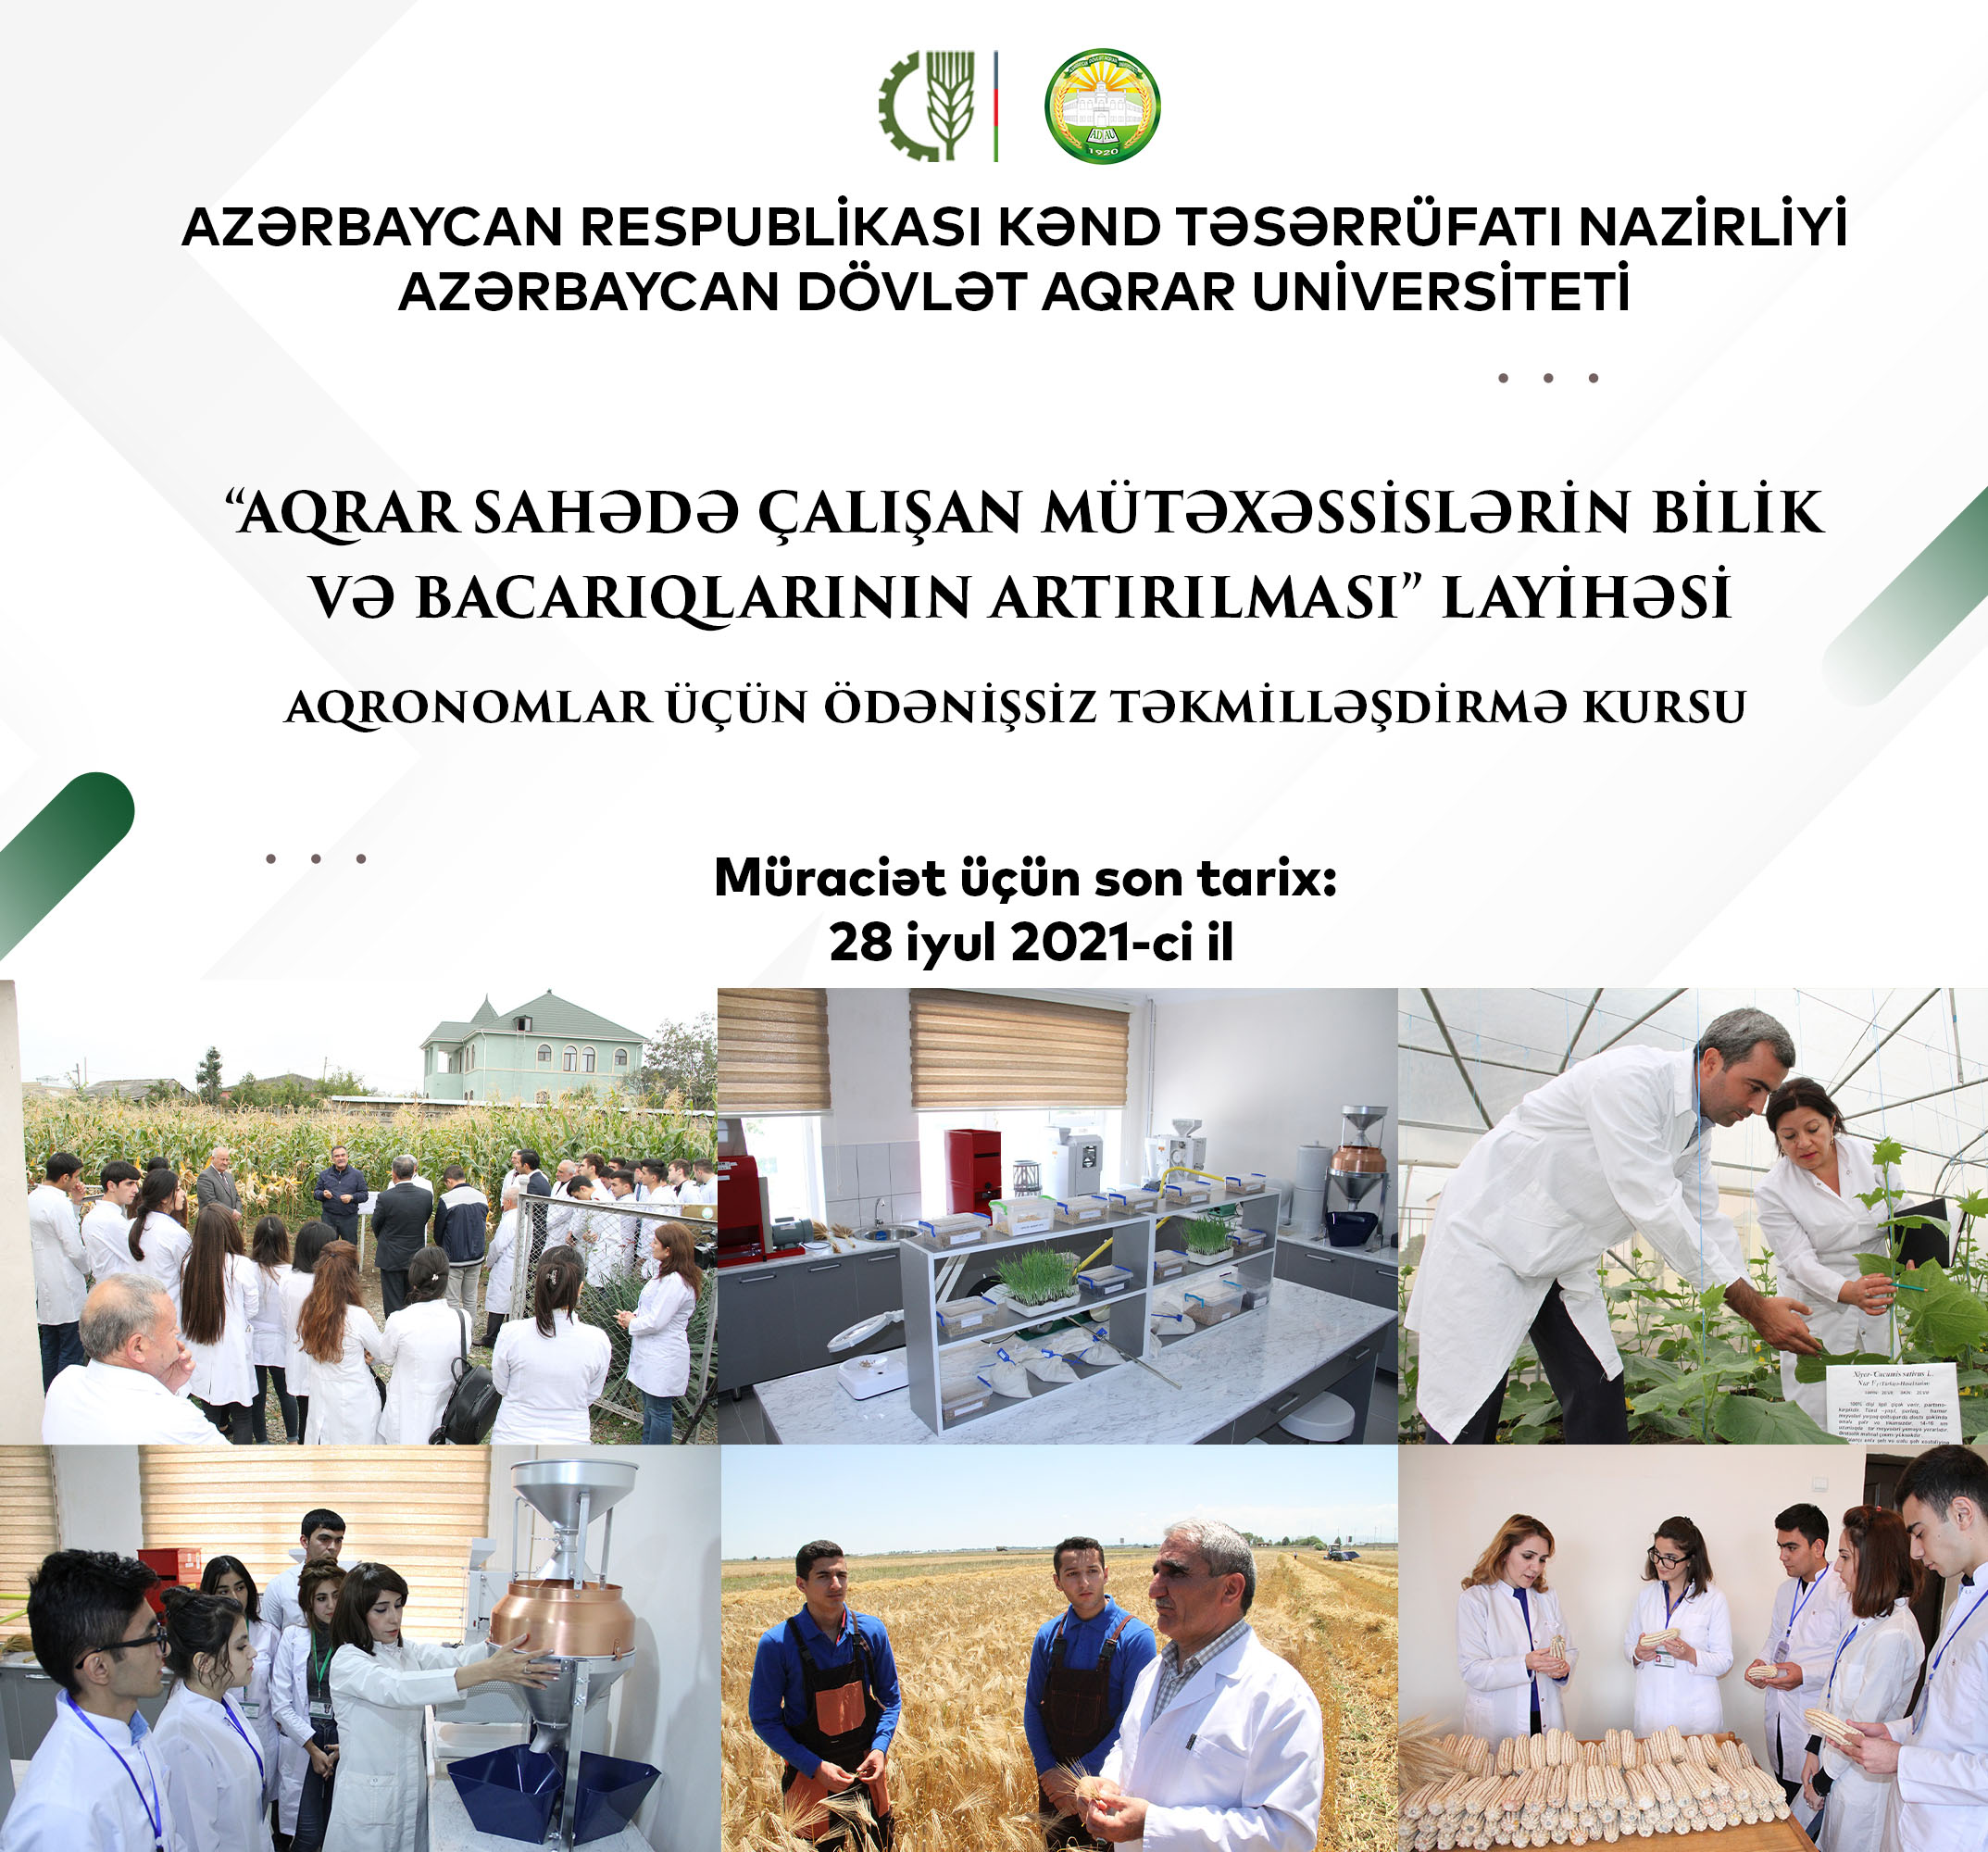 Registration for free advanced training courses commenced at Agricultural University